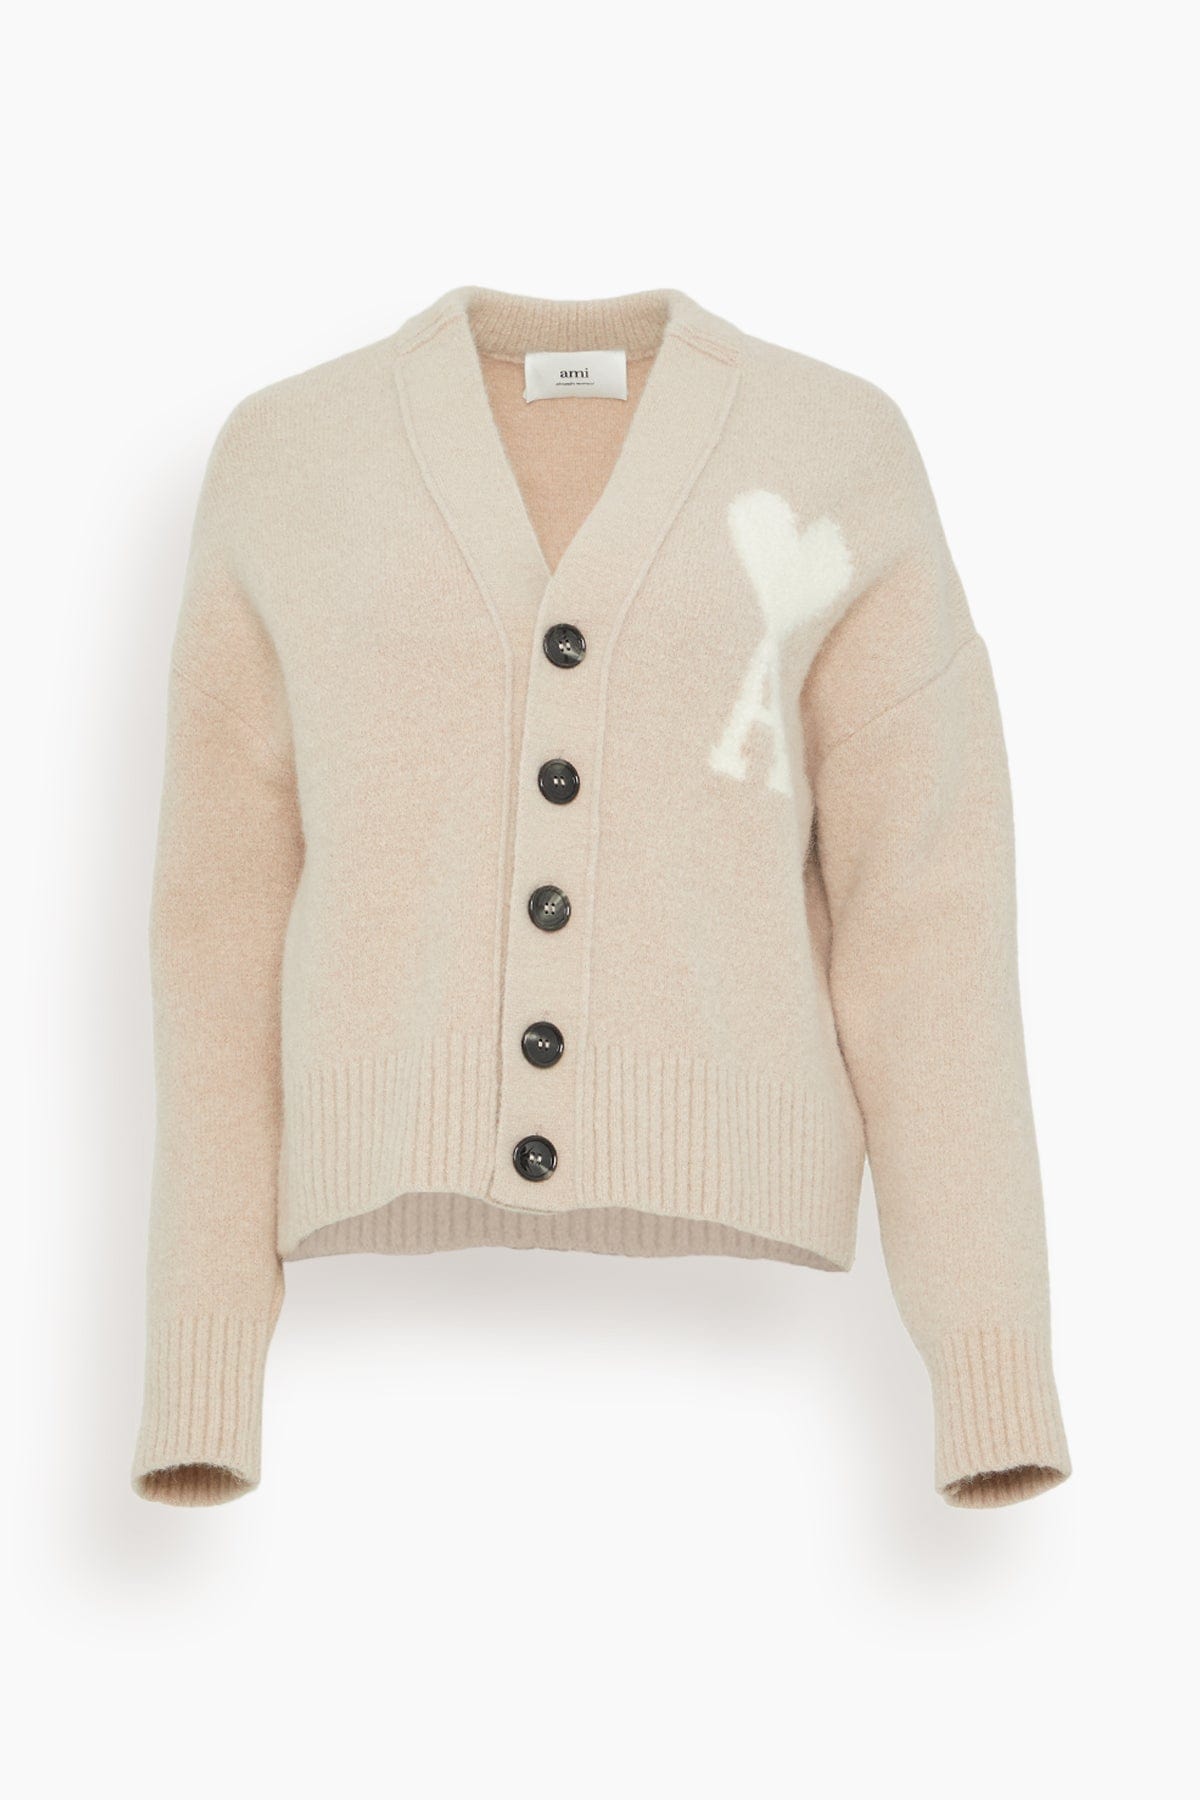 Ami Paris Sweaters Off White ADC Cardigan in Powder Pink/Ivory